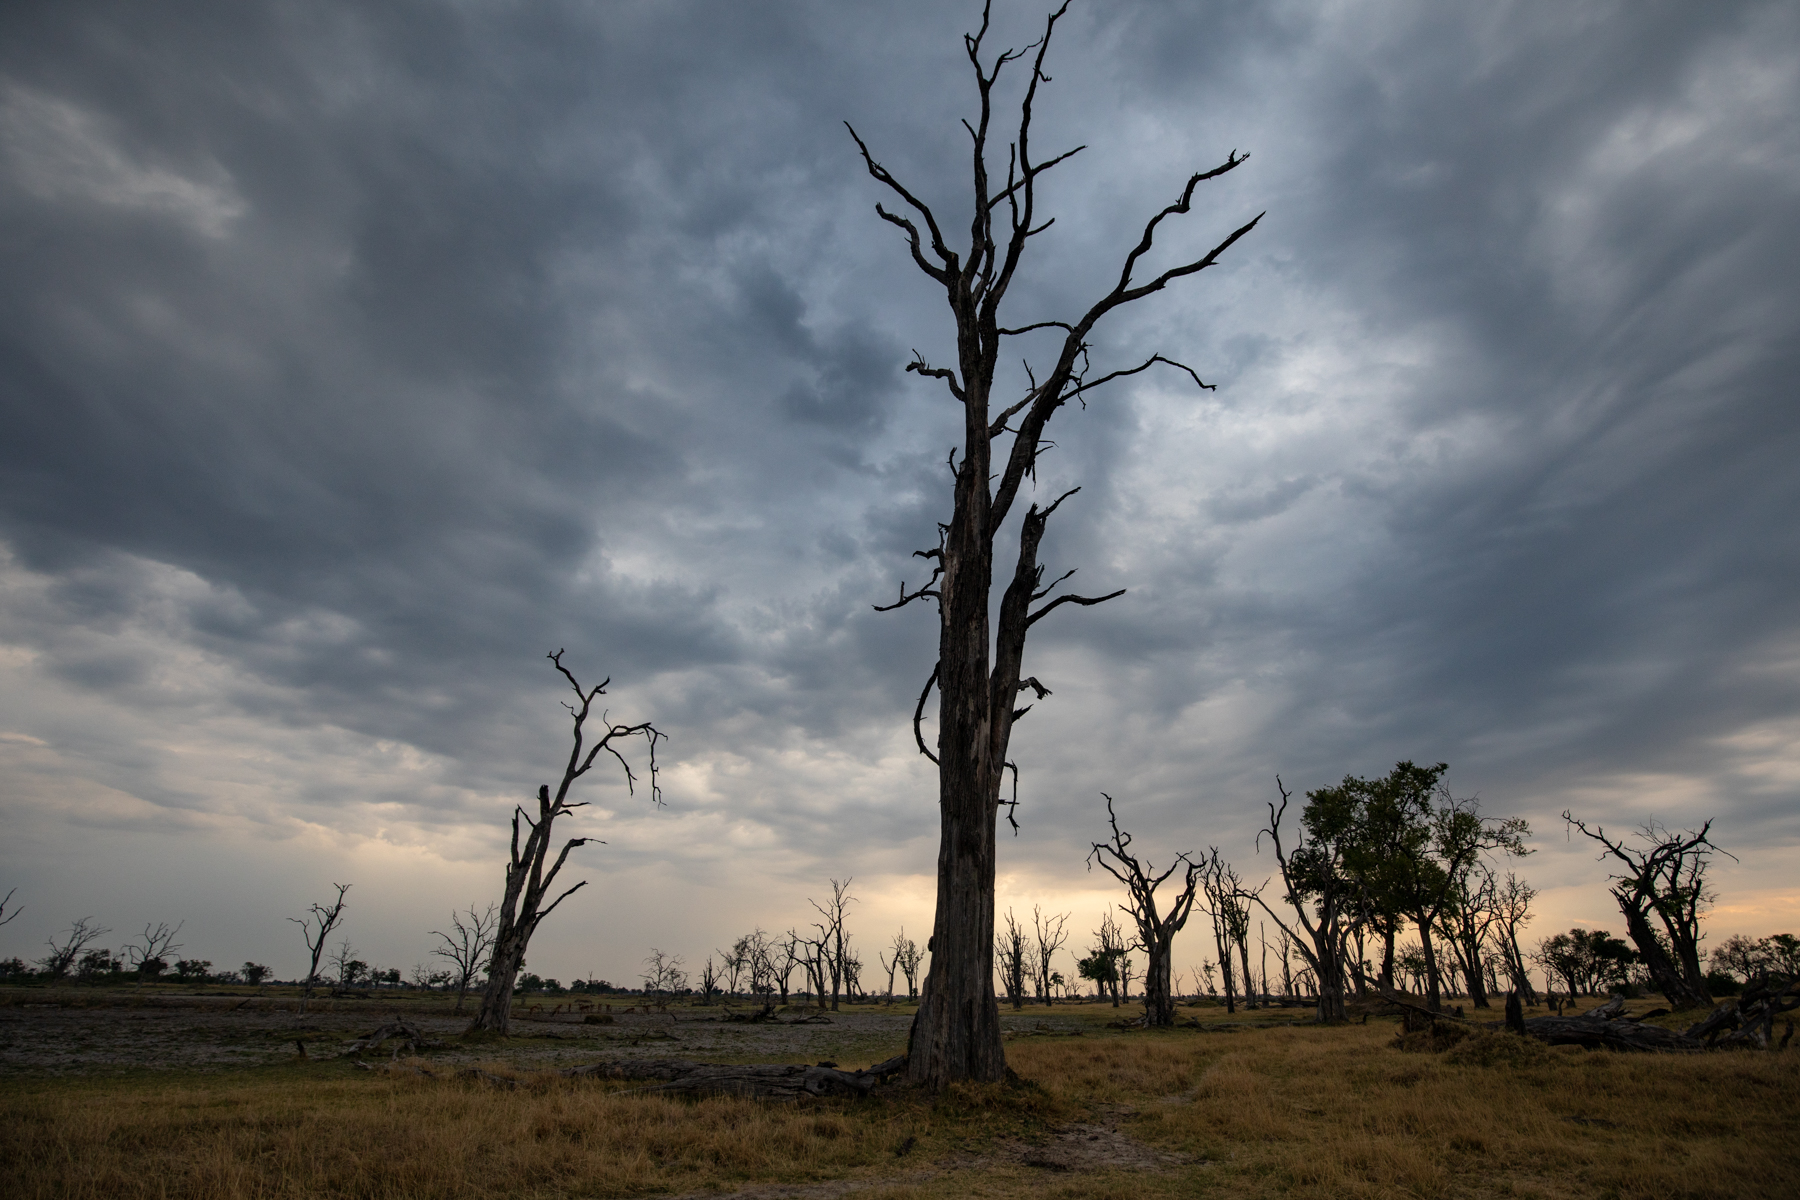 Sometimes the Okavango floods are so high that they kill the trees